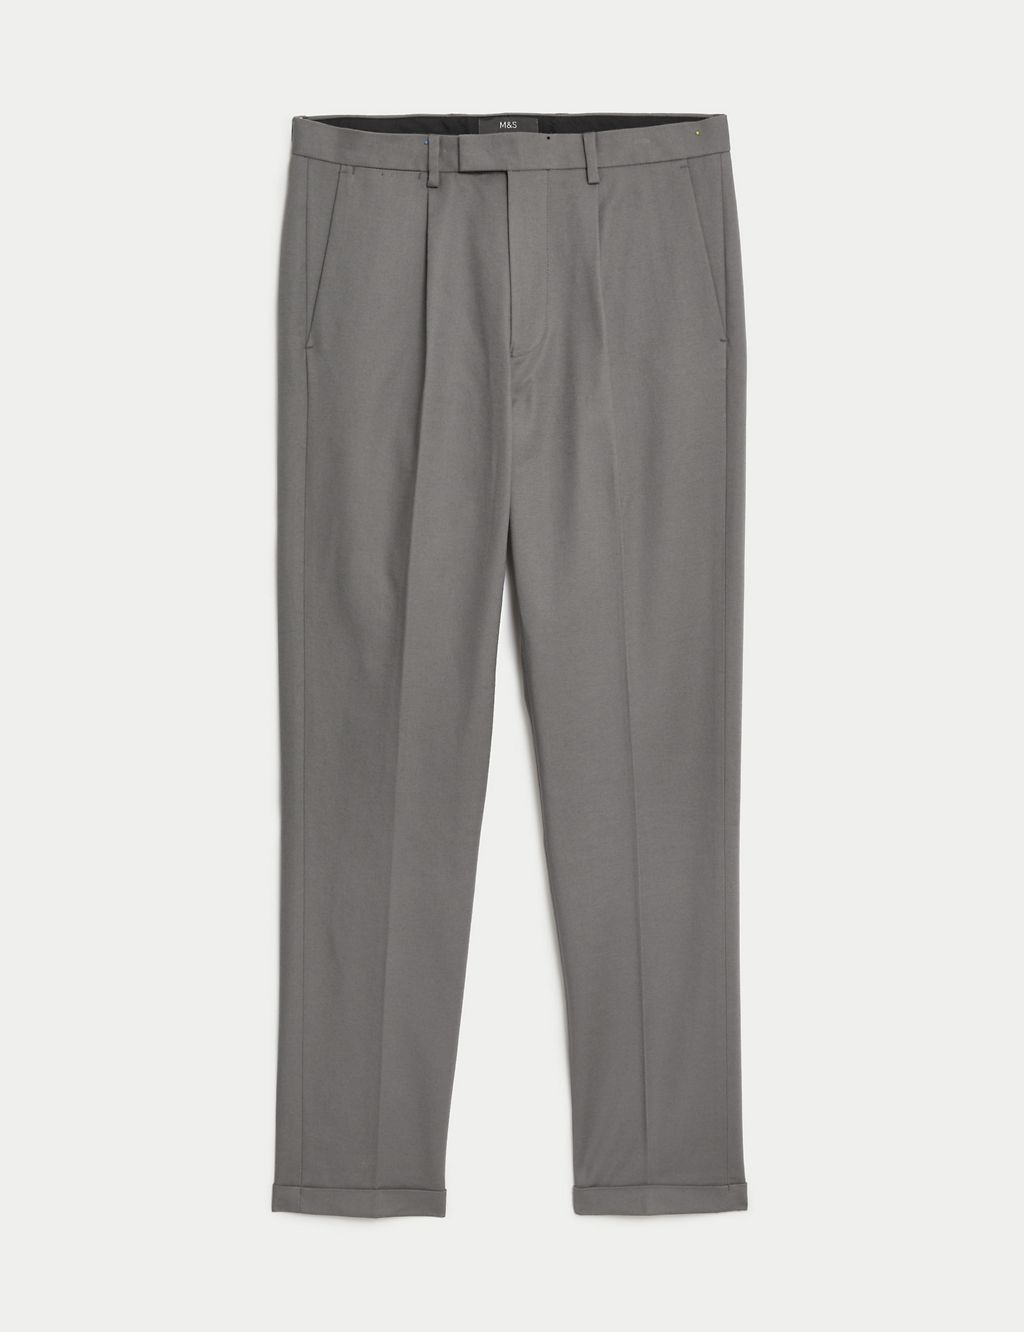 Tapered Fit Smart Stretch Chinos 1 of 6